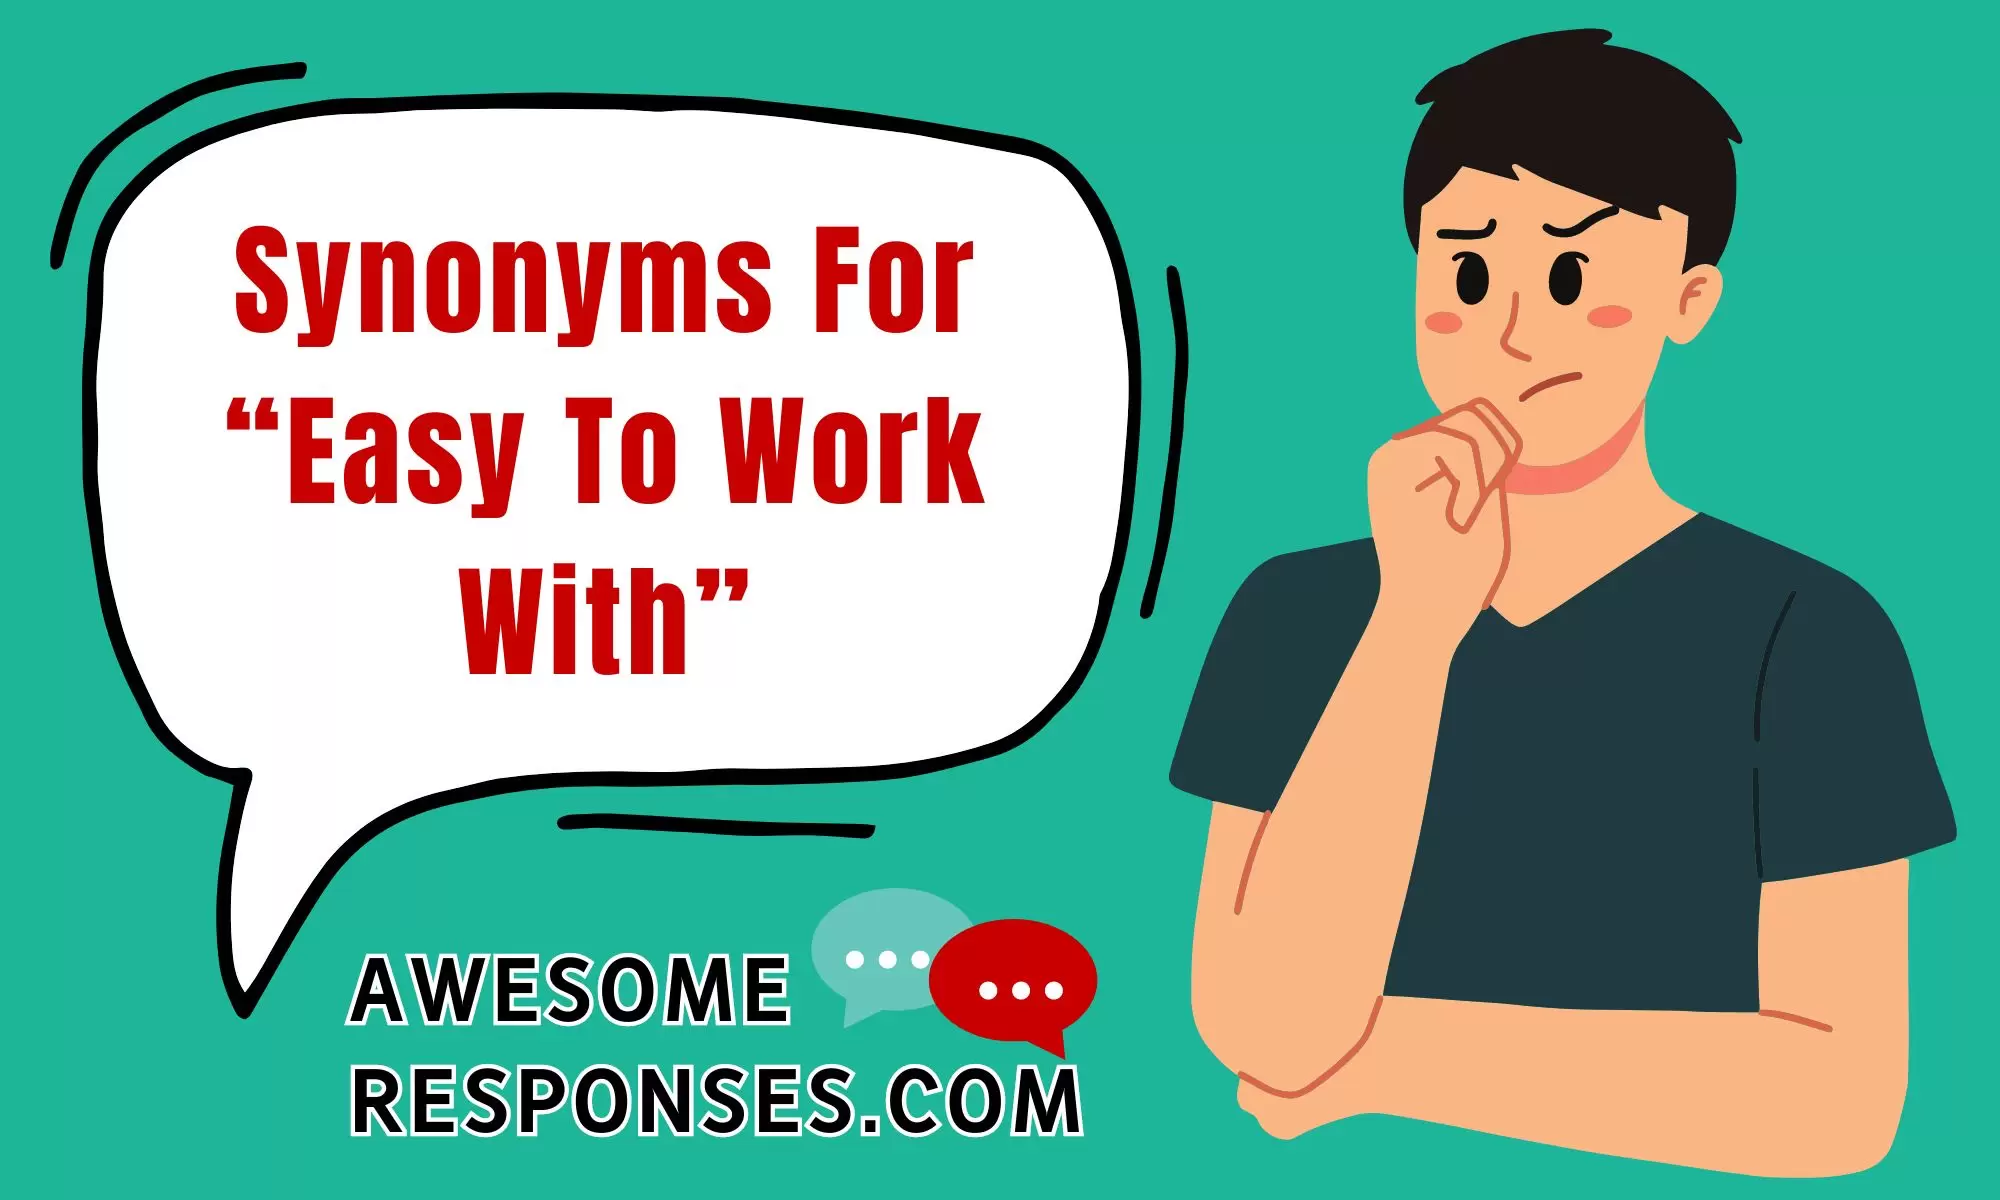 Synonyms For “Easy To Work With”